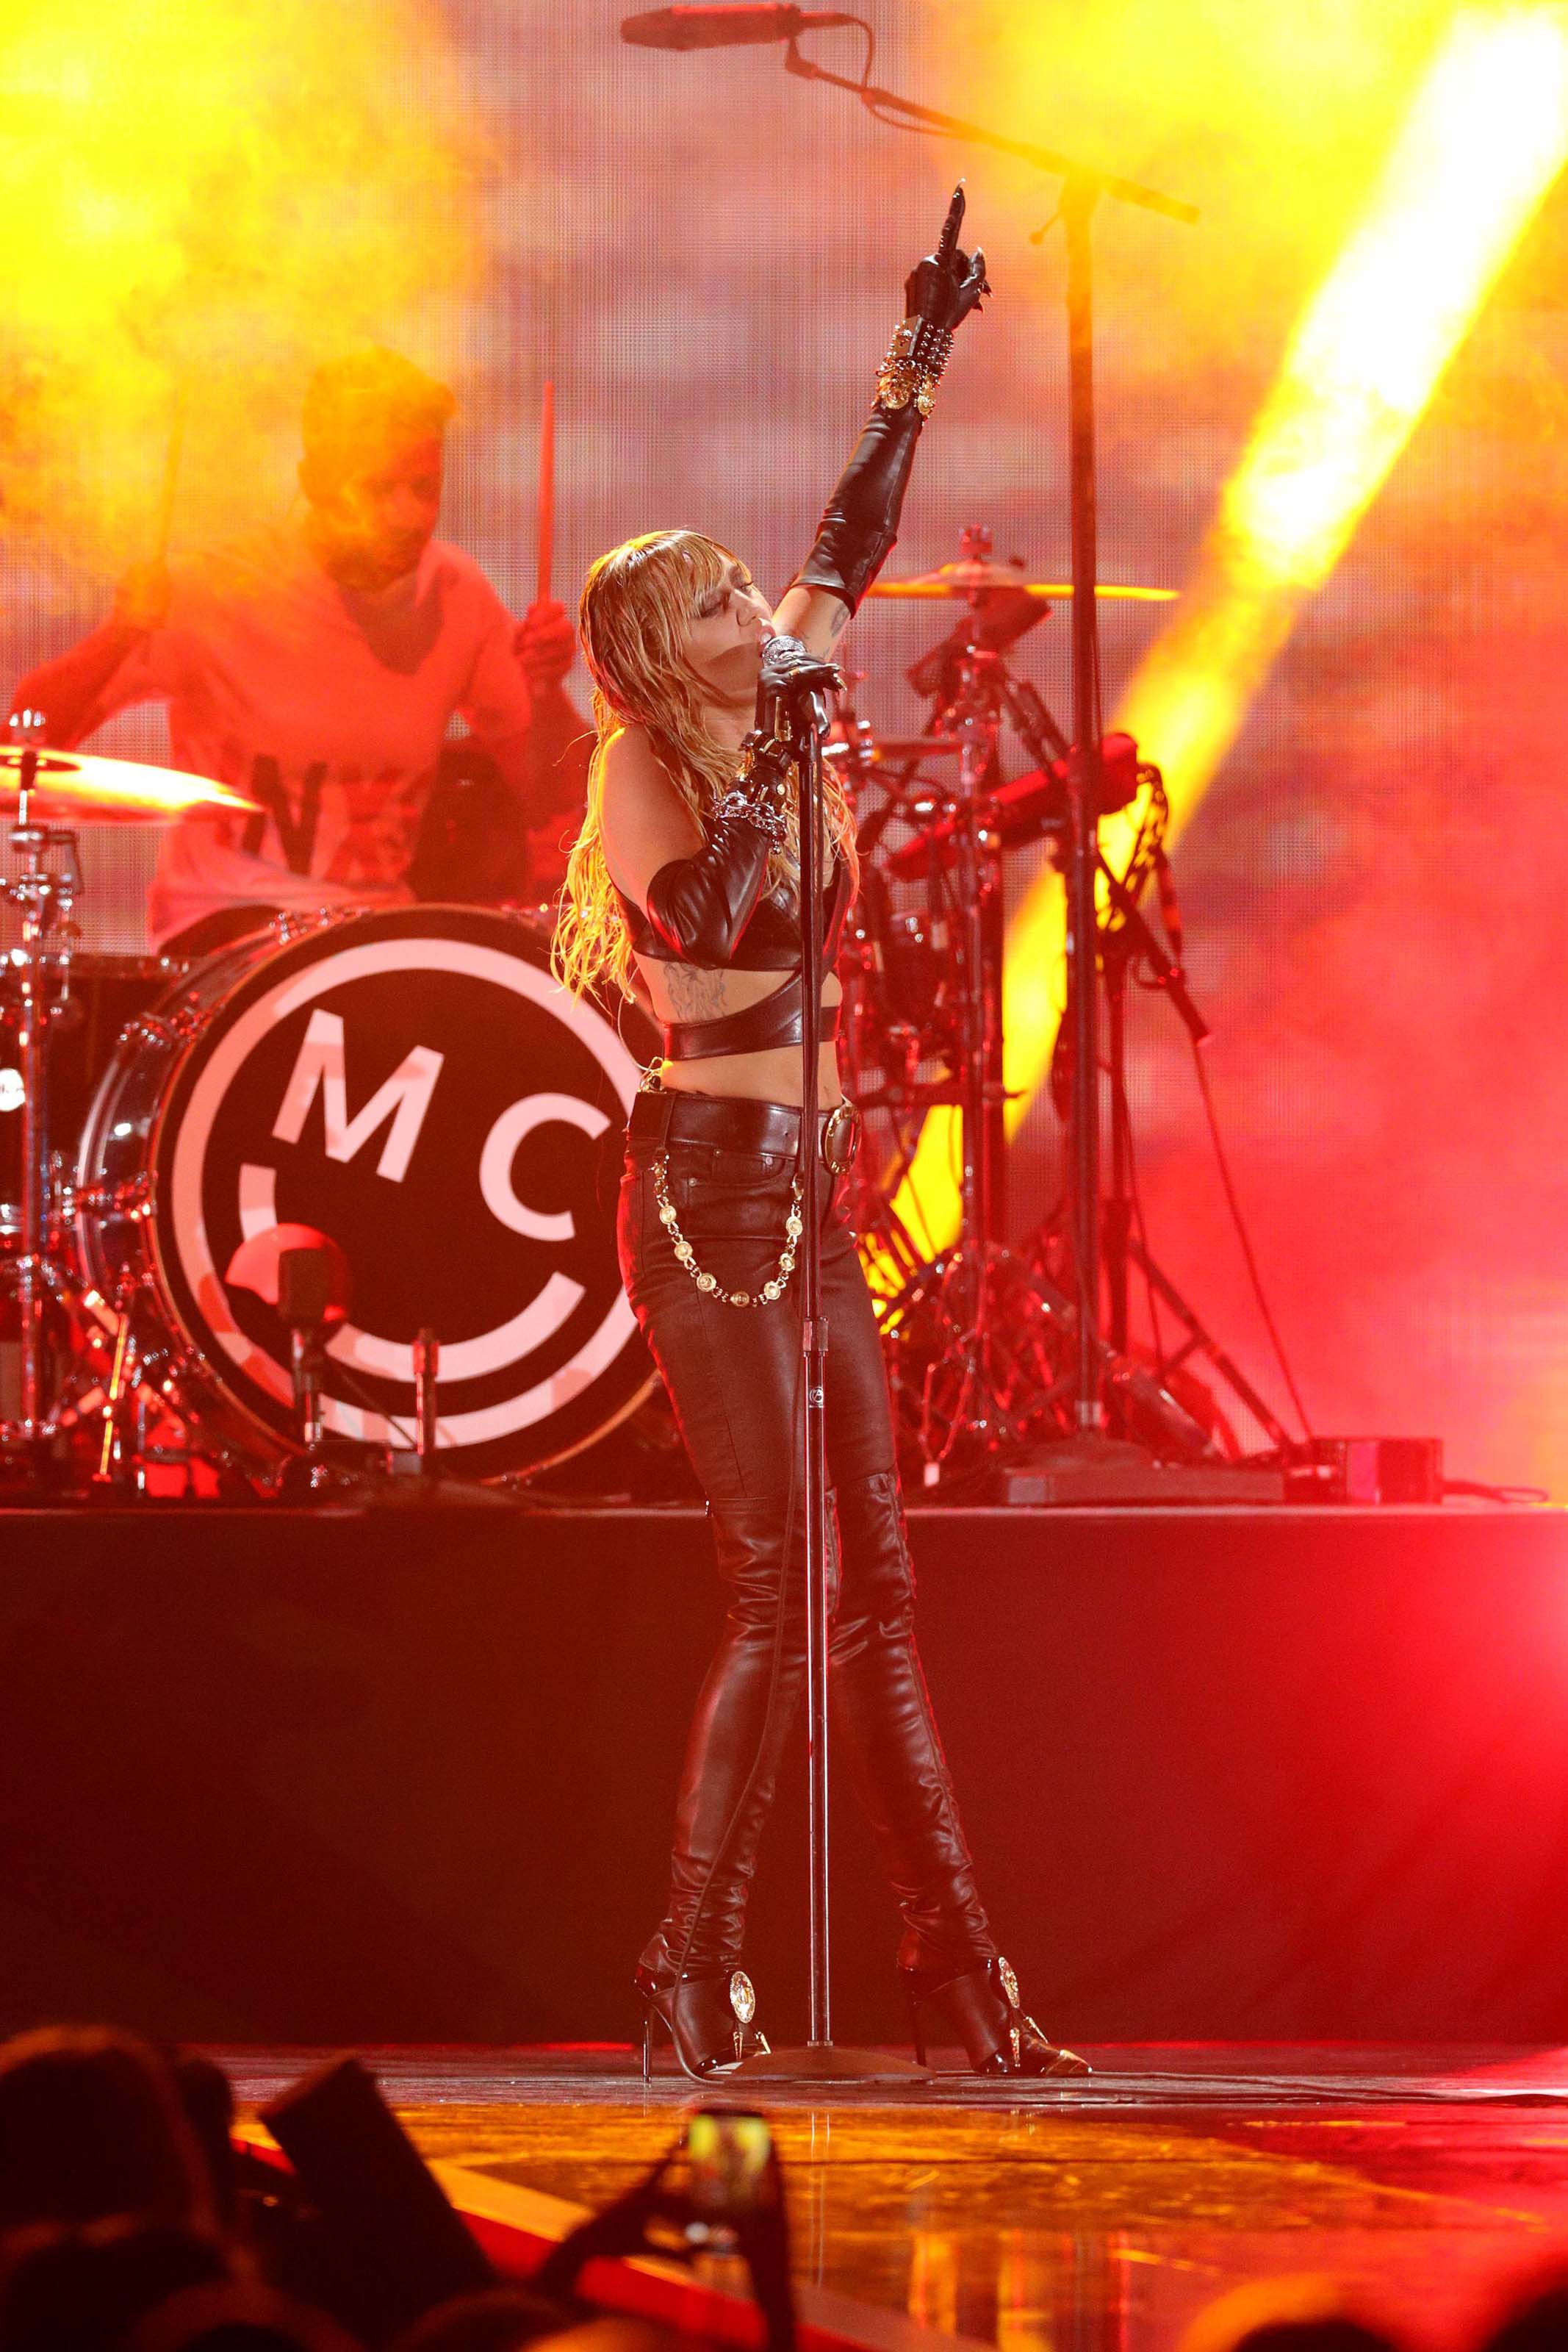 Miley Cyrus performs at 2019 iHeartRadio Music Festival